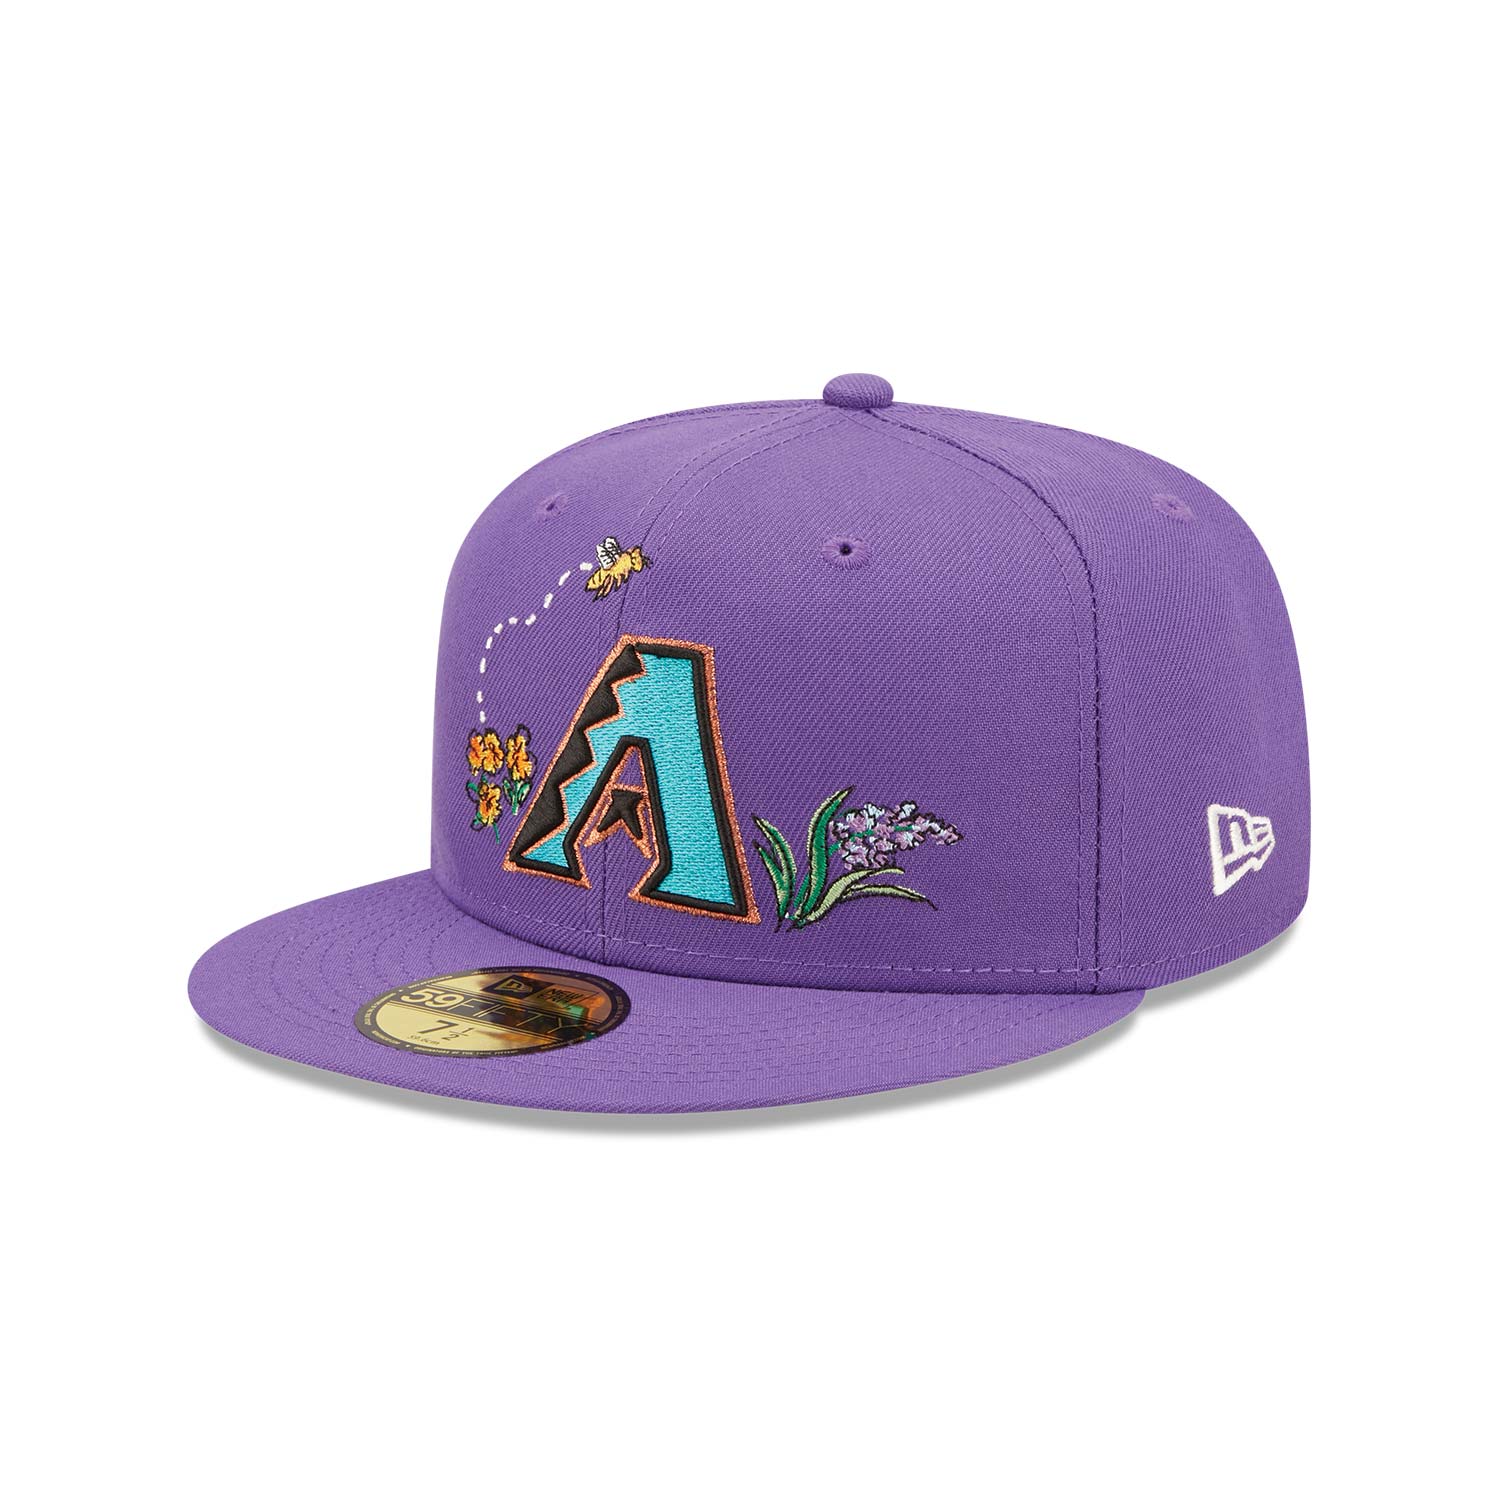 Purple Fitted Cap | Purple Fitted Hats | New Era Cap NL